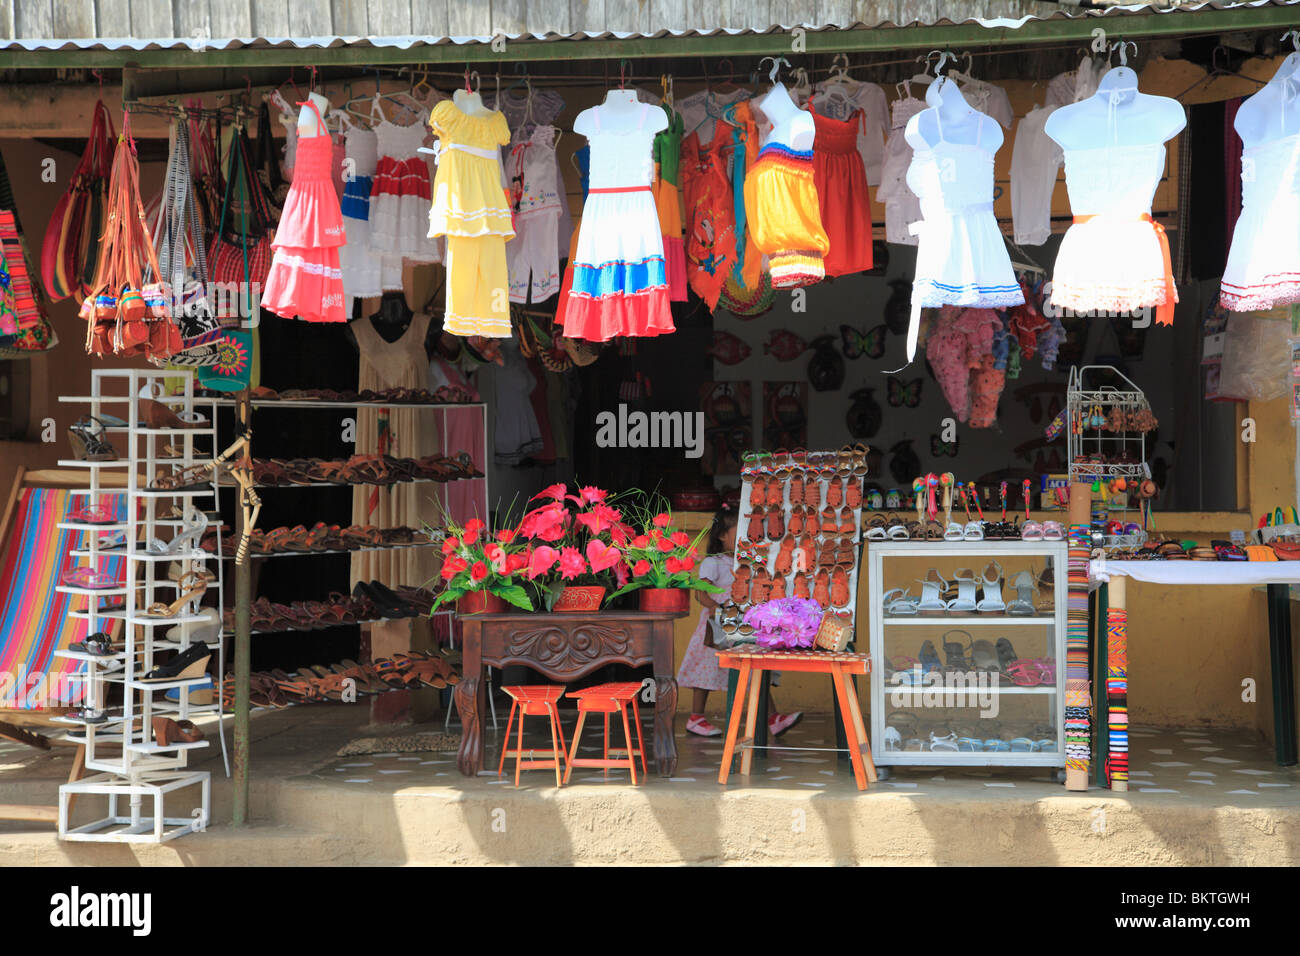 Shop, Catarina, a village that is one of the Los Pueblos Blancos, Nicaragua, Central America Stock Photo